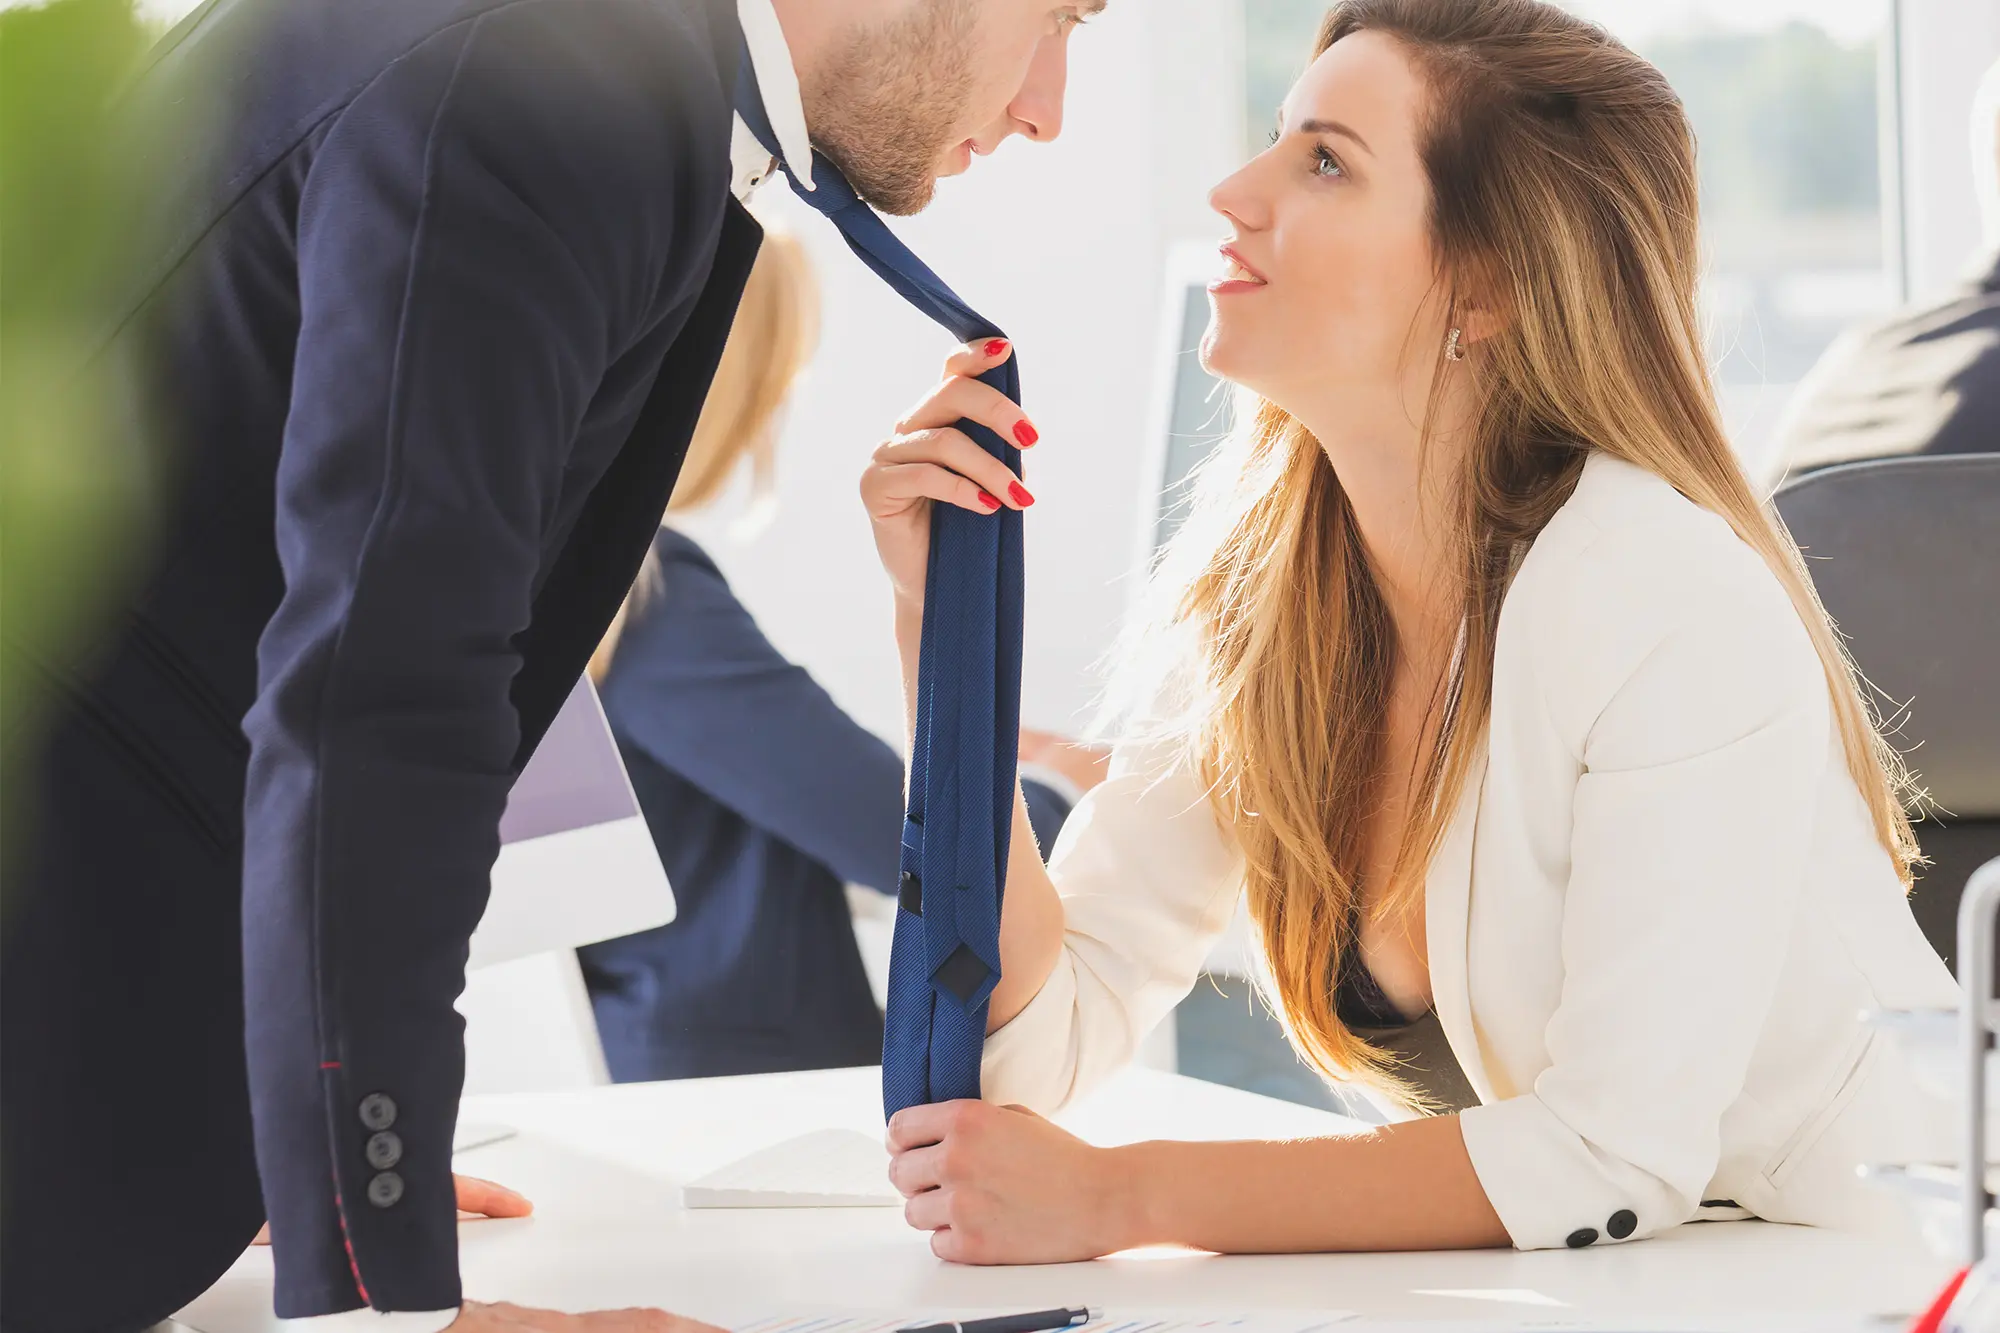 The Complexities of Workplace Romance and How to Navigate Them